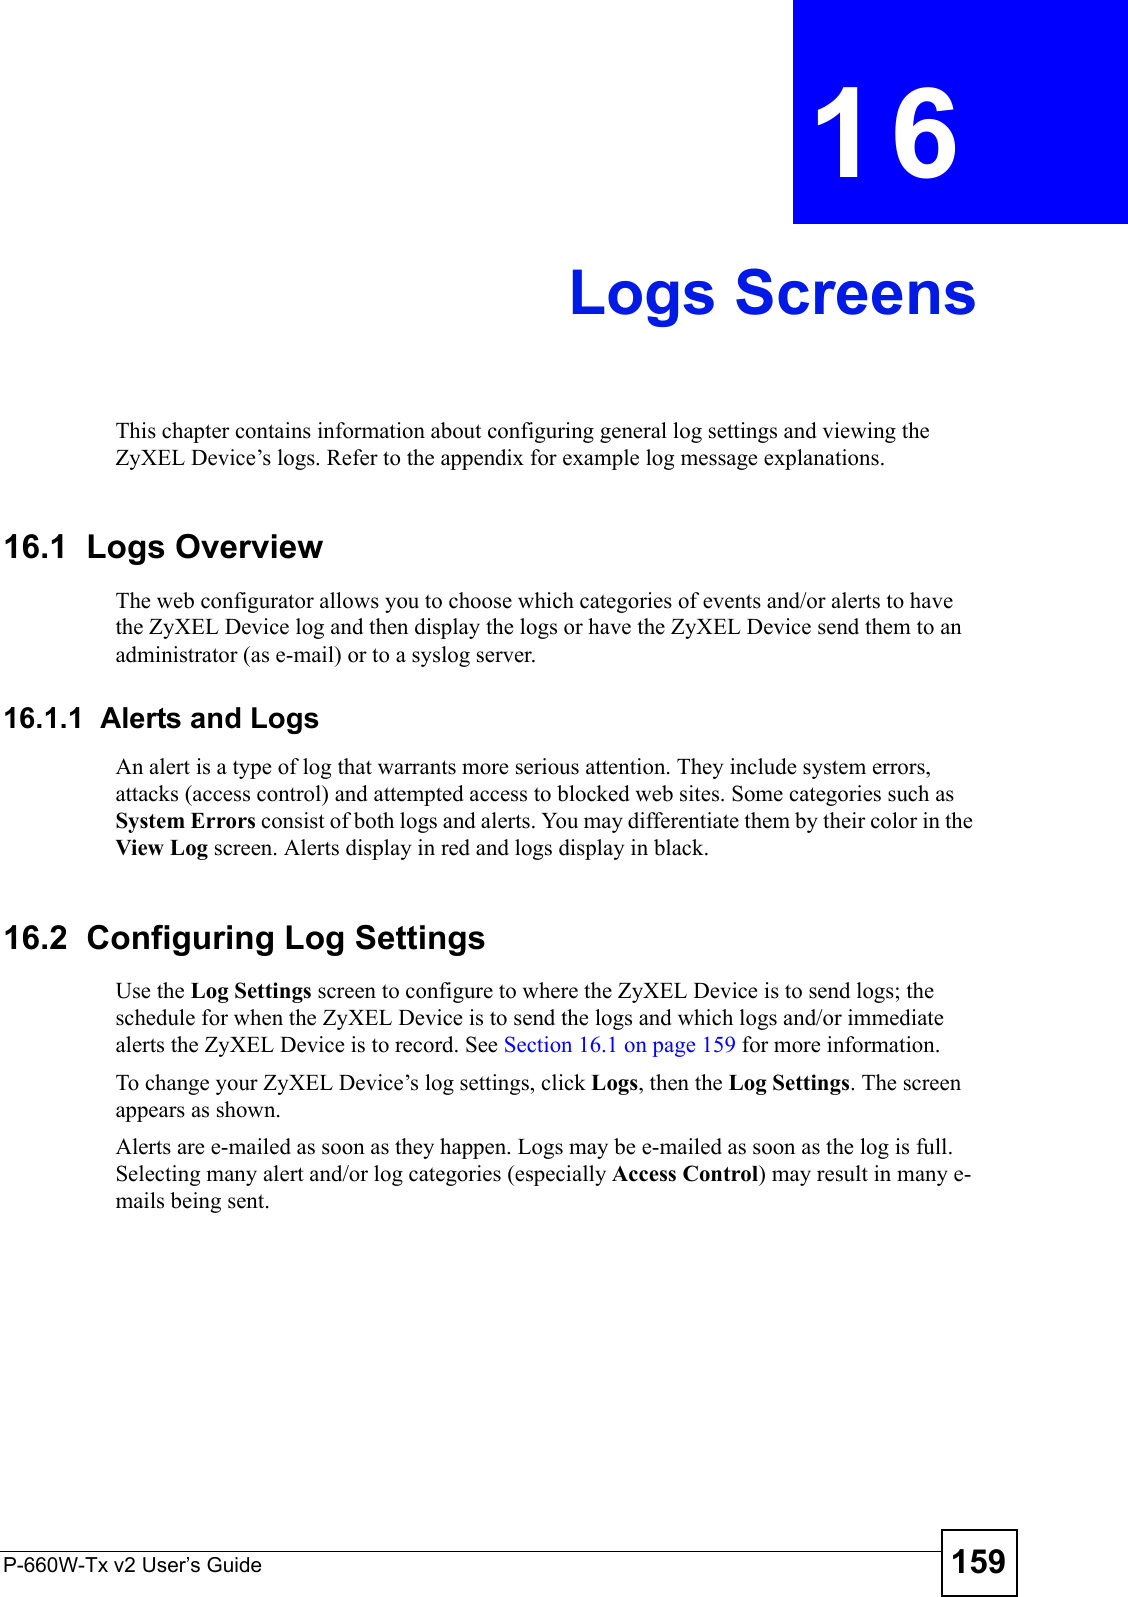 P-660W-Tx v2 User’s Guide 159CHAPTER  16 Logs ScreensThis chapter contains information about configuring general log settings and viewing the ZyXEL Device’s logs. Refer to the appendix for example log message explanations.16.1  Logs Overview The web configurator allows you to choose which categories of events and/or alerts to have the ZyXEL Device log and then display the logs or have the ZyXEL Device send them to an administrator (as e-mail) or to a syslog server. 16.1.1  Alerts and LogsAn alert is a type of log that warrants more serious attention. They include system errors, attacks (access control) and attempted access to blocked web sites. Some categories such as System Errors consist of both logs and alerts. You may differentiate them by their color in the View Log screen. Alerts display in red and logs display in black.16.2  Configuring Log Settings Use the Log Settings screen to configure to where the ZyXEL Device is to send logs; the schedule for when the ZyXEL Device is to send the logs and which logs and/or immediate alerts the ZyXEL Device is to record. See Section 16.1 on page 159 for more information. To change your ZyXEL Device’s log settings, click Logs, then the Log Settings. The screen appears as shown.Alerts are e-mailed as soon as they happen. Logs may be e-mailed as soon as the log is full. Selecting many alert and/or log categories (especially Access Control) may result in many e-mails being sent.